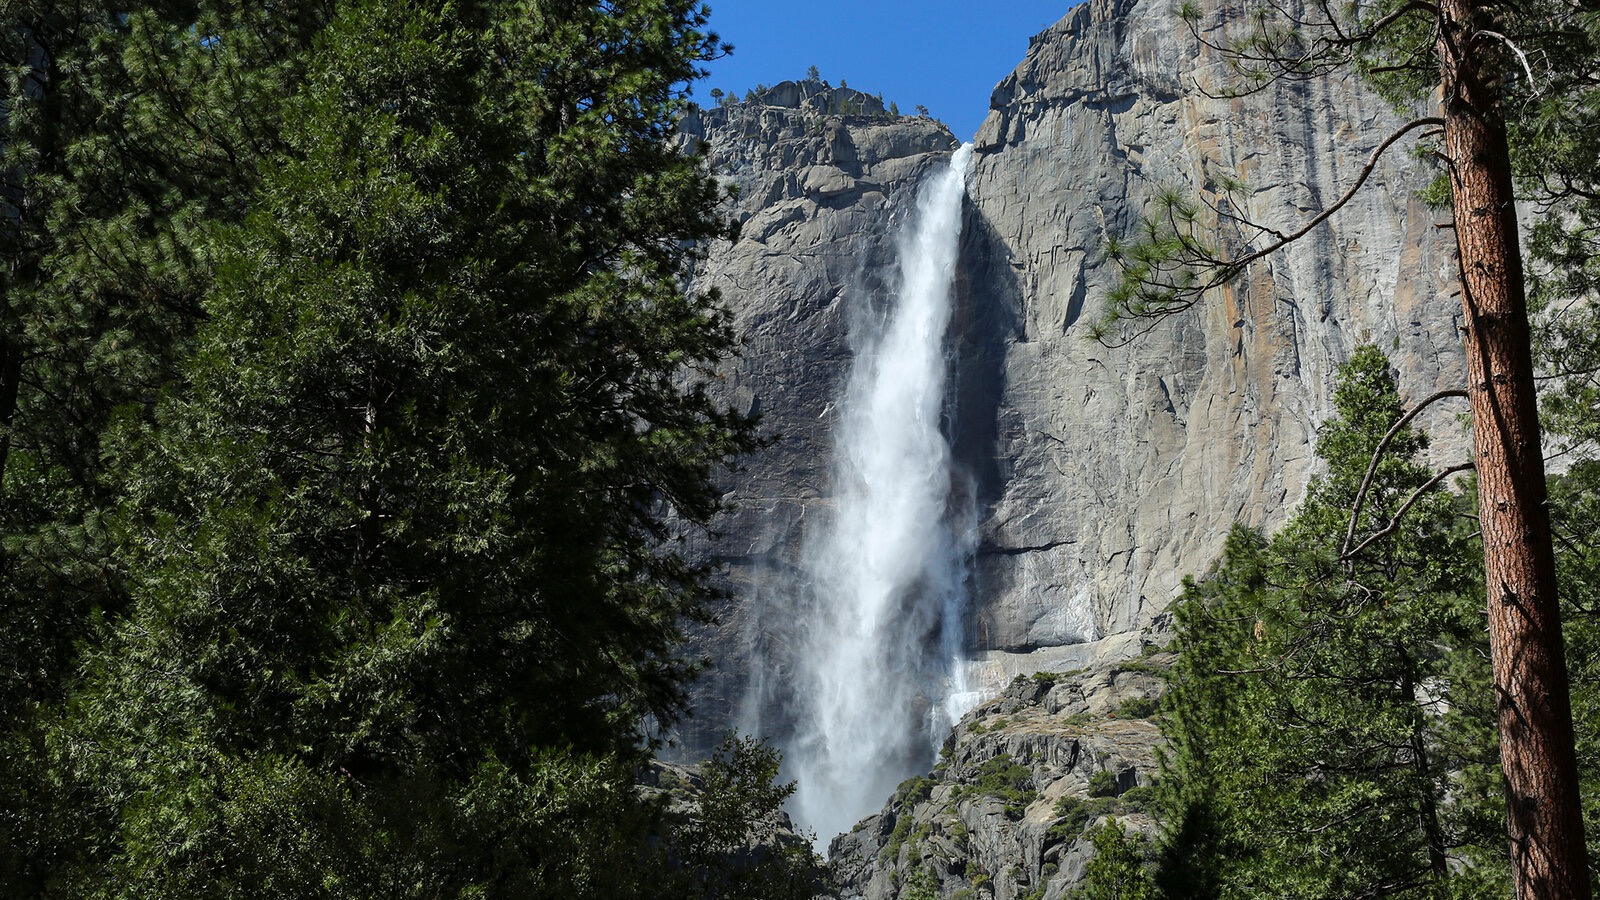 Here Are 24 Glorious Natural Attractions – Can You Match Them to Their Country? Yosemite Falls